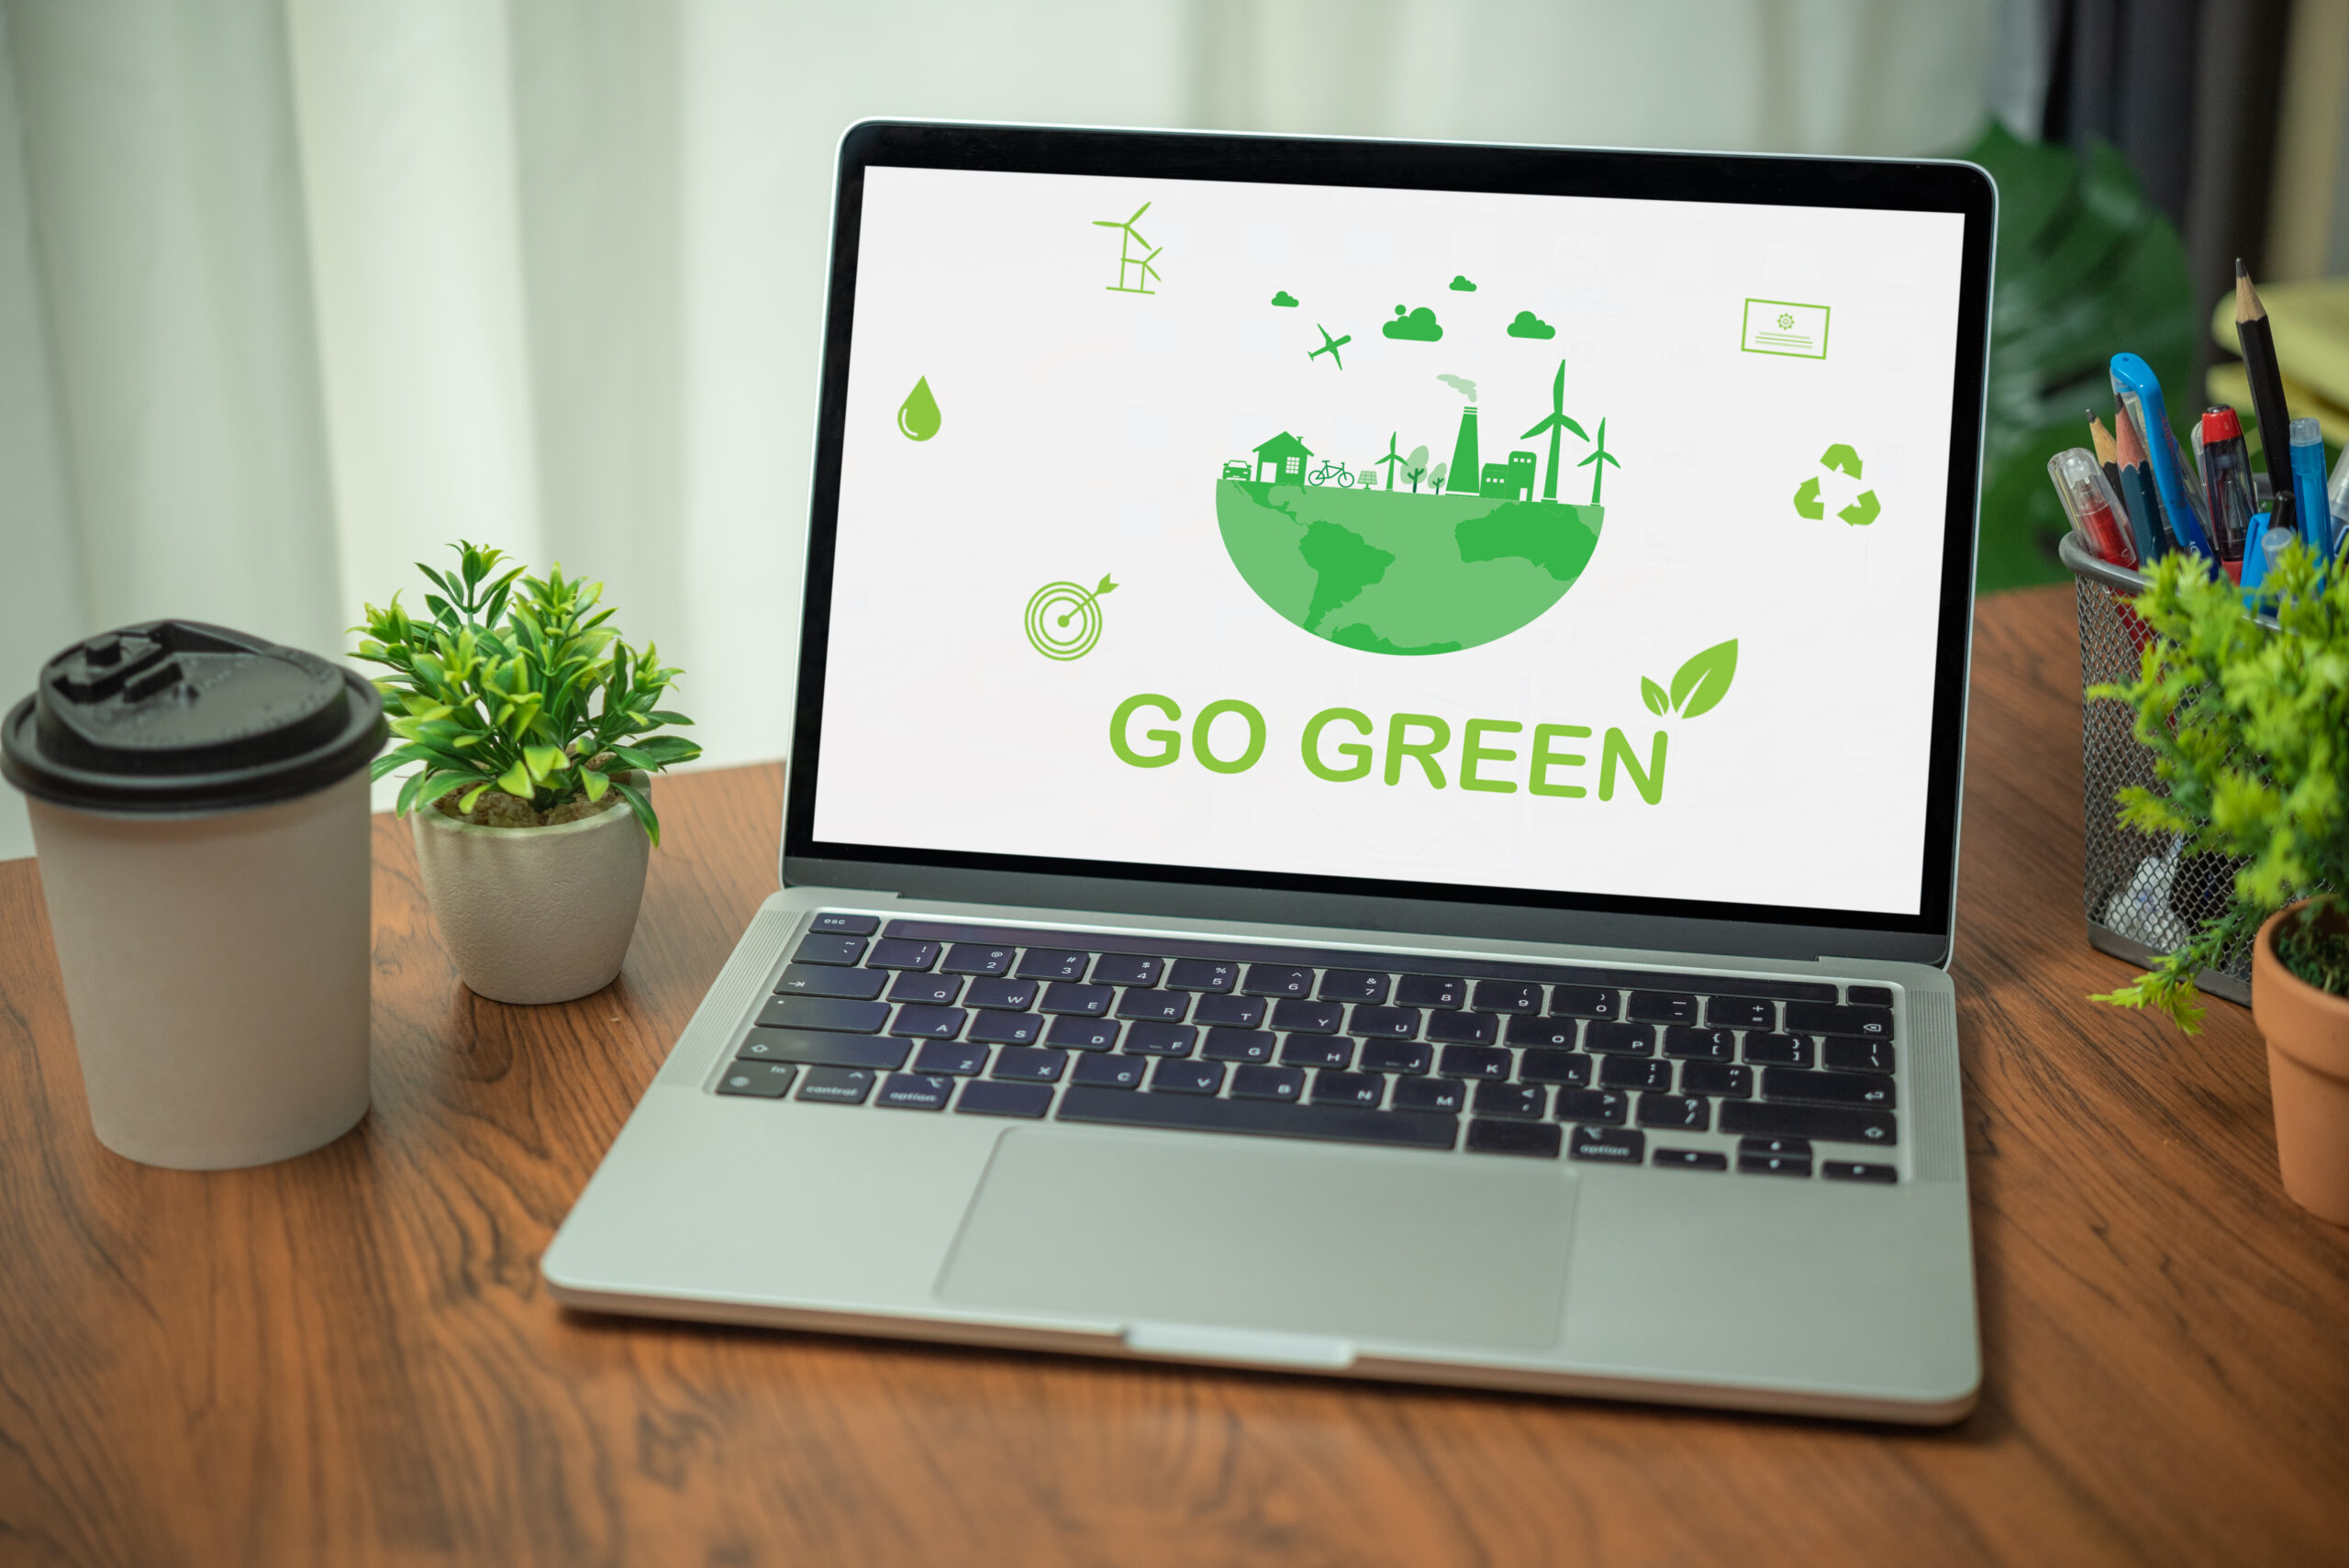 Stockphoto of a laptop that says Go Green and shows green symbols that relate to the environment